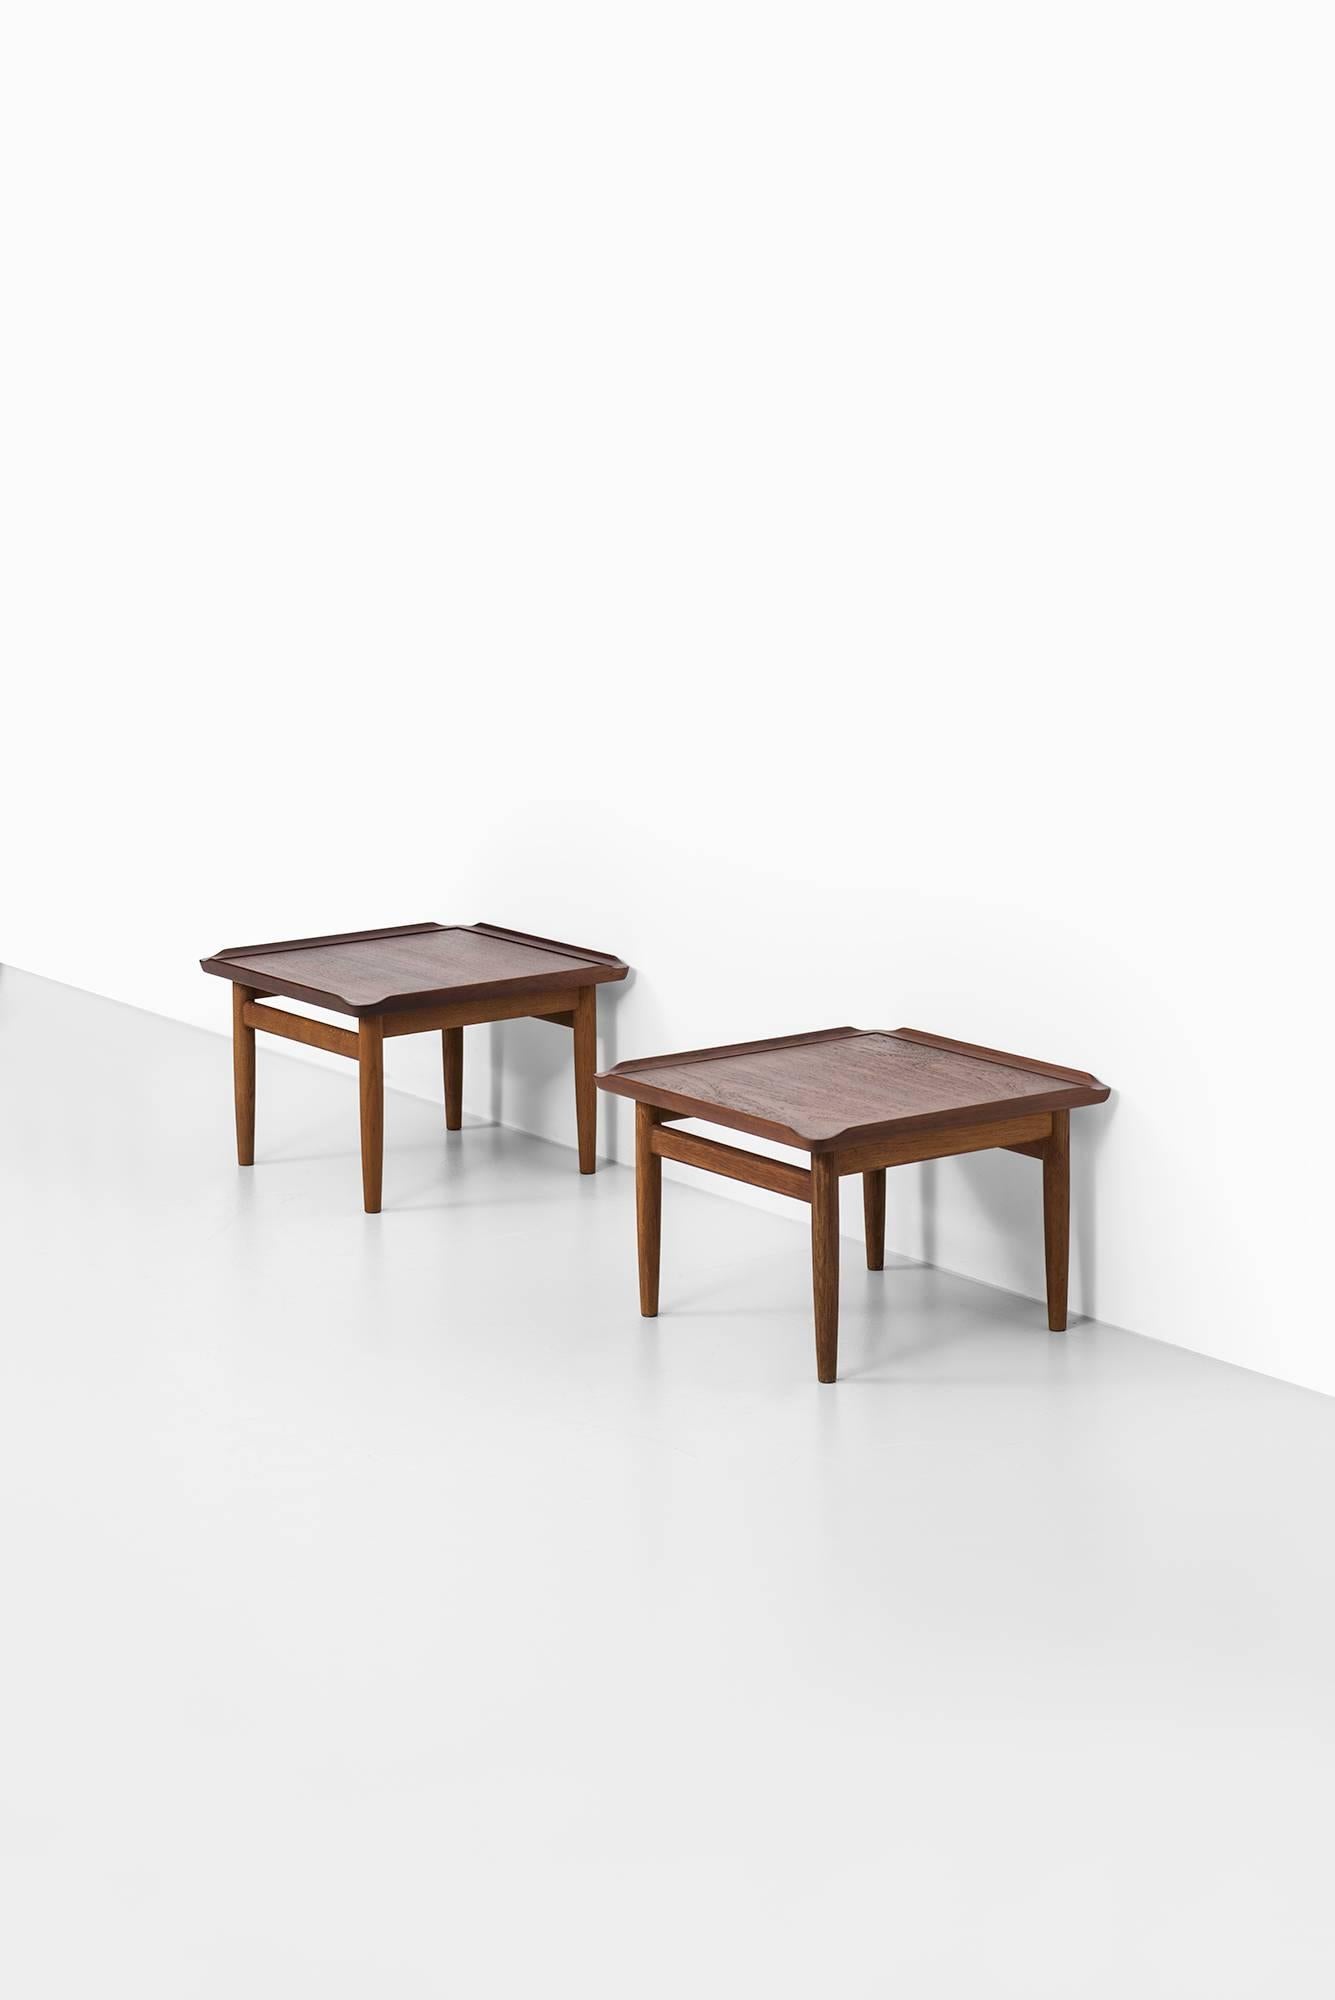 Rare pair of side tables designed by Kurt Ostervig. Produced by Jason Møbler in Denmark.